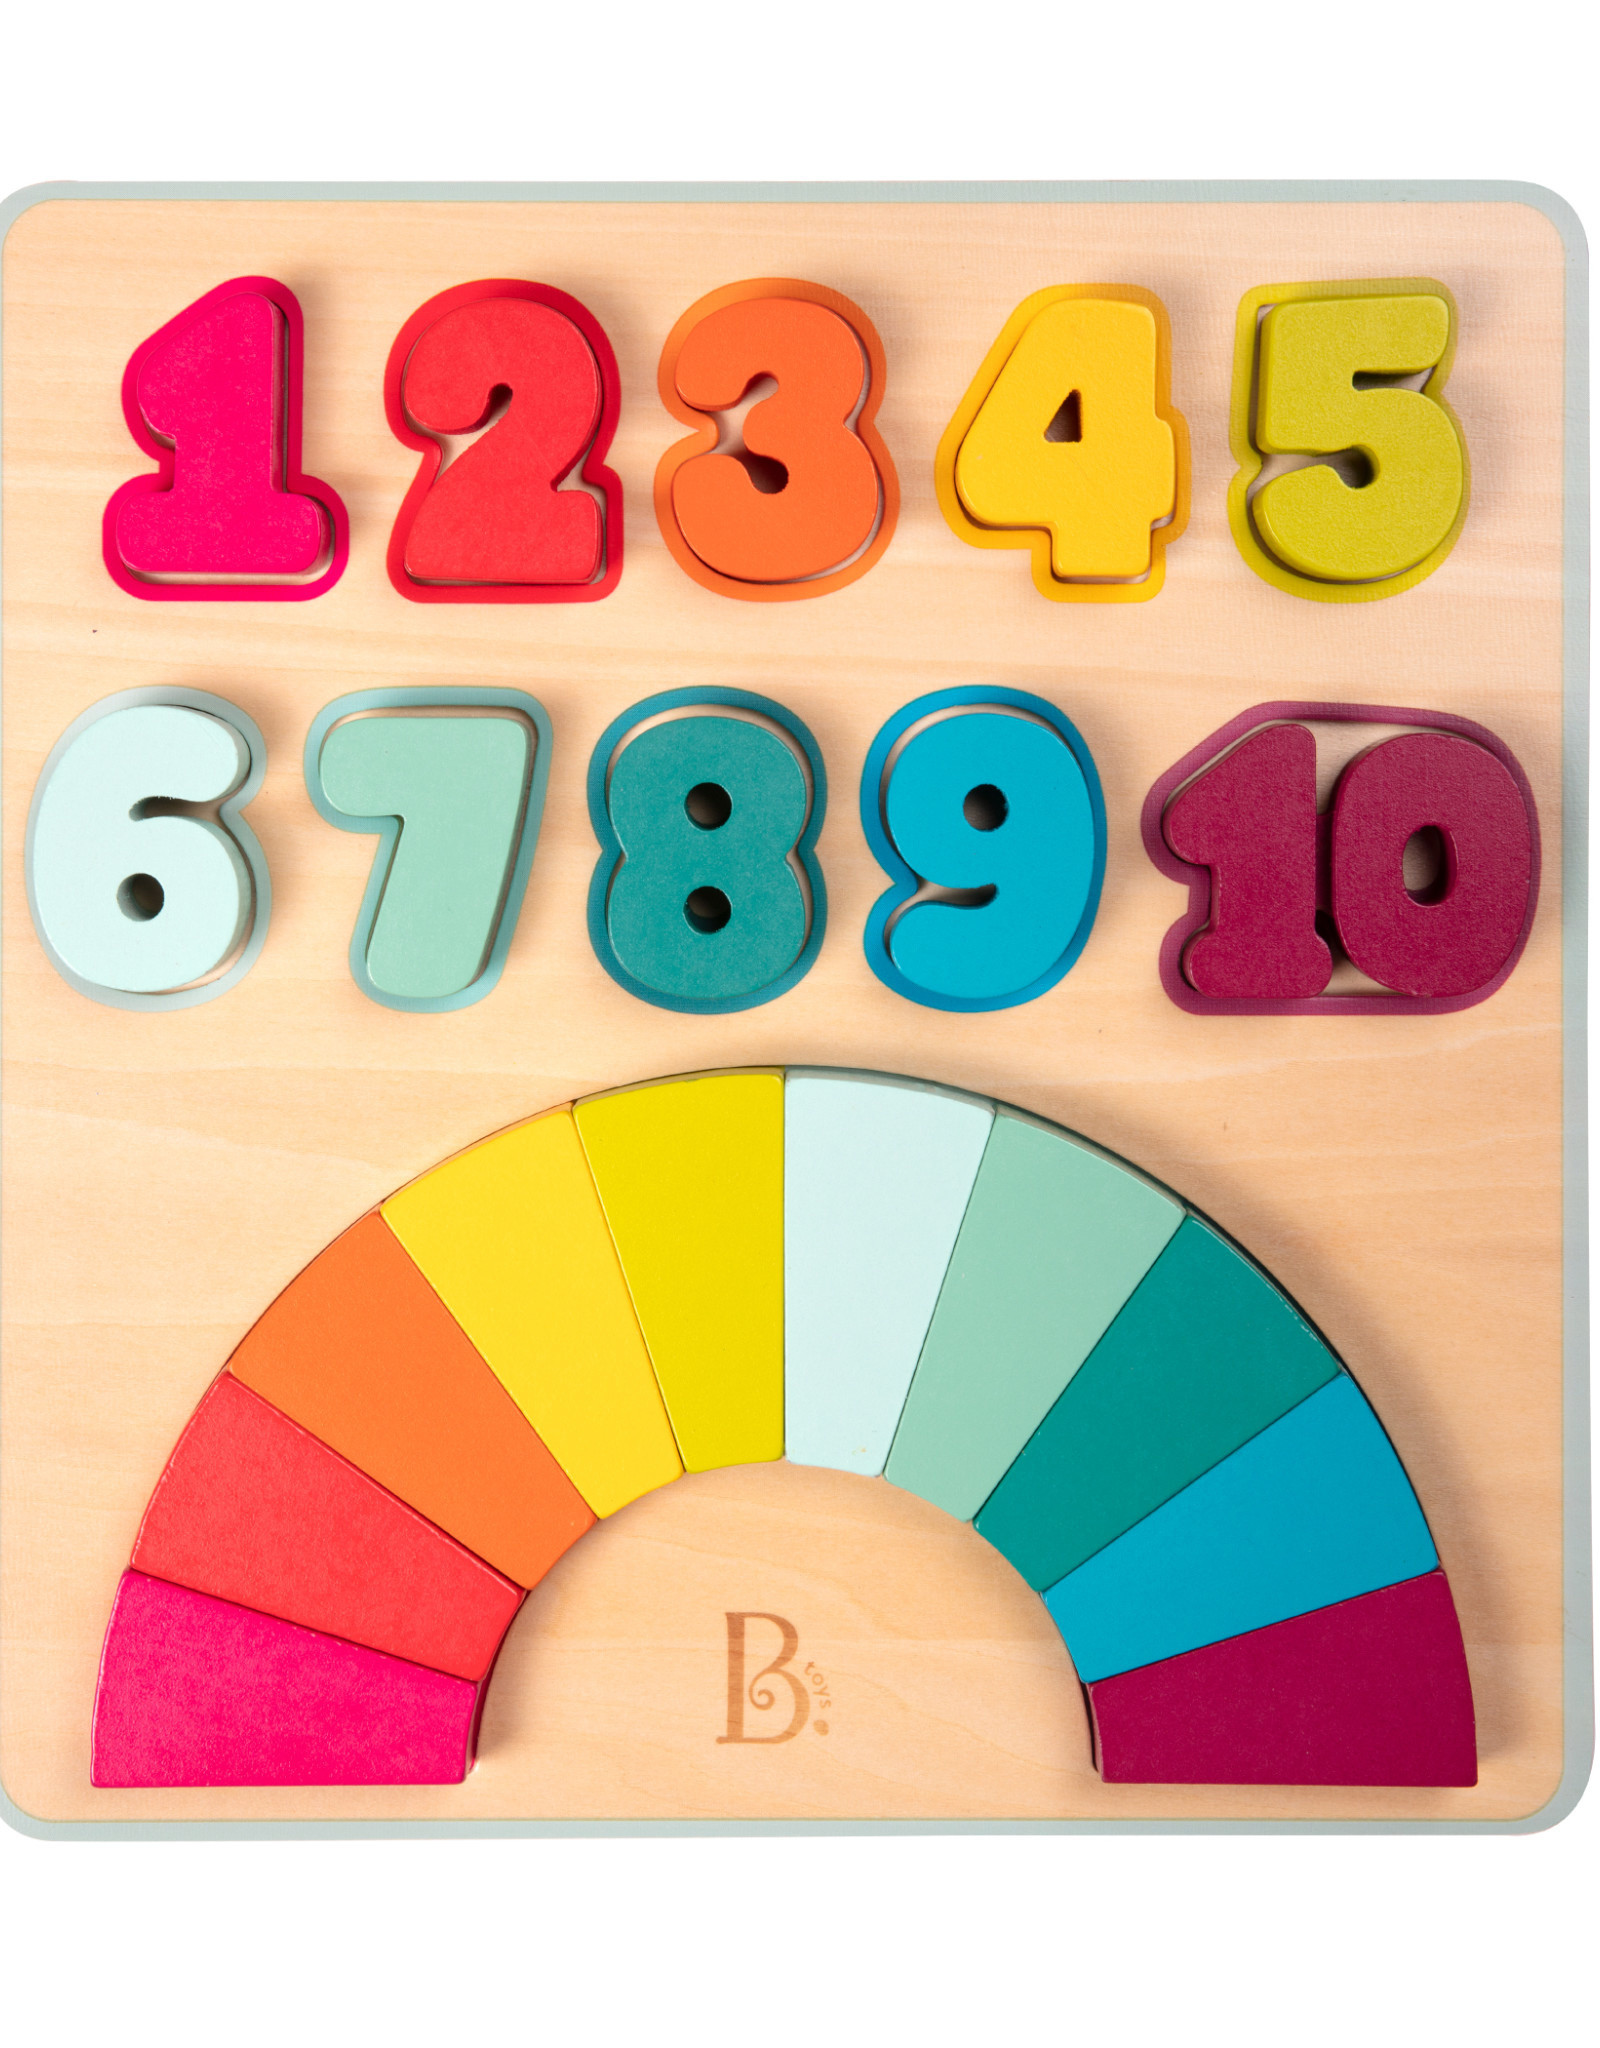 B. Toy Number Puzzle Counting Rainbows